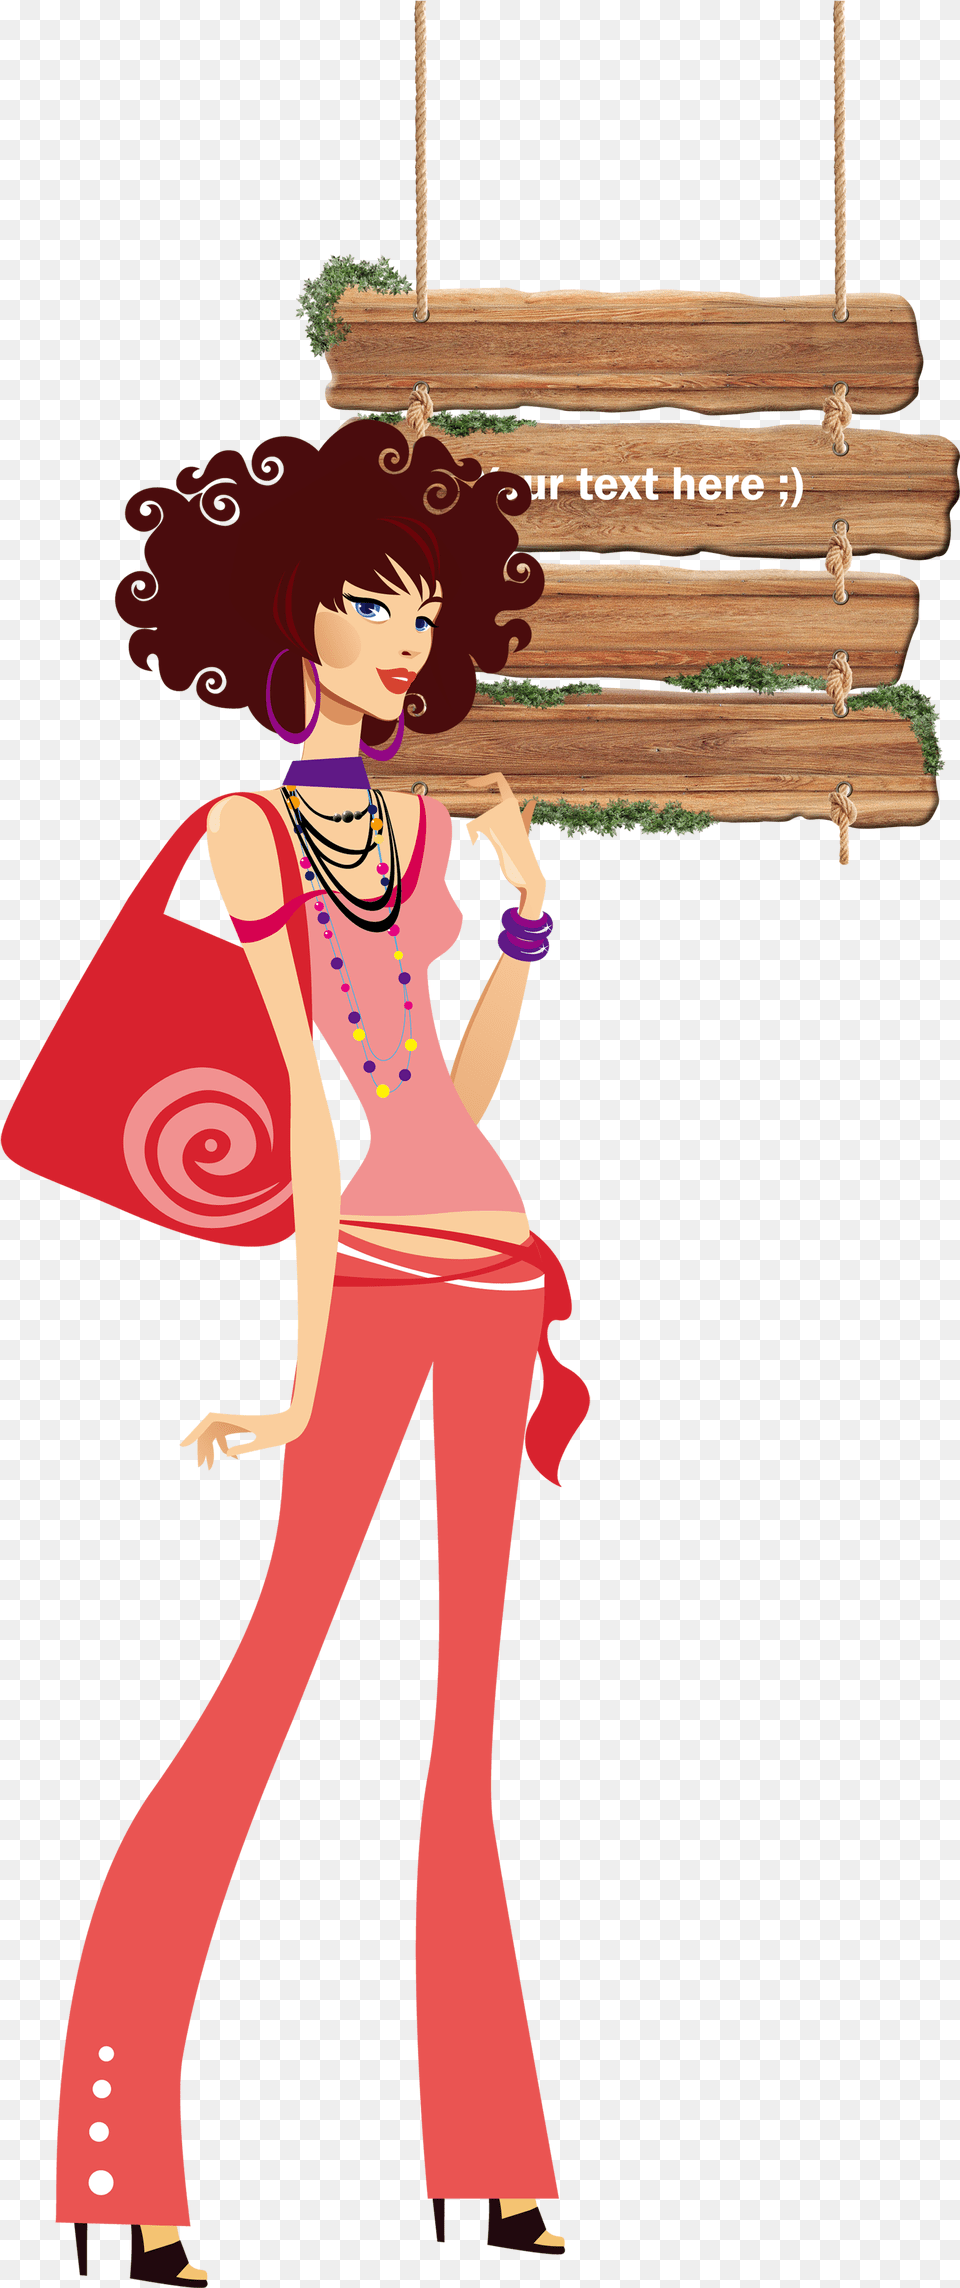 Style Clipart Fashion Girl 15 2112 X 3828 Dumielauxepices 2011, Woman, Adult, Female, Person Png Image